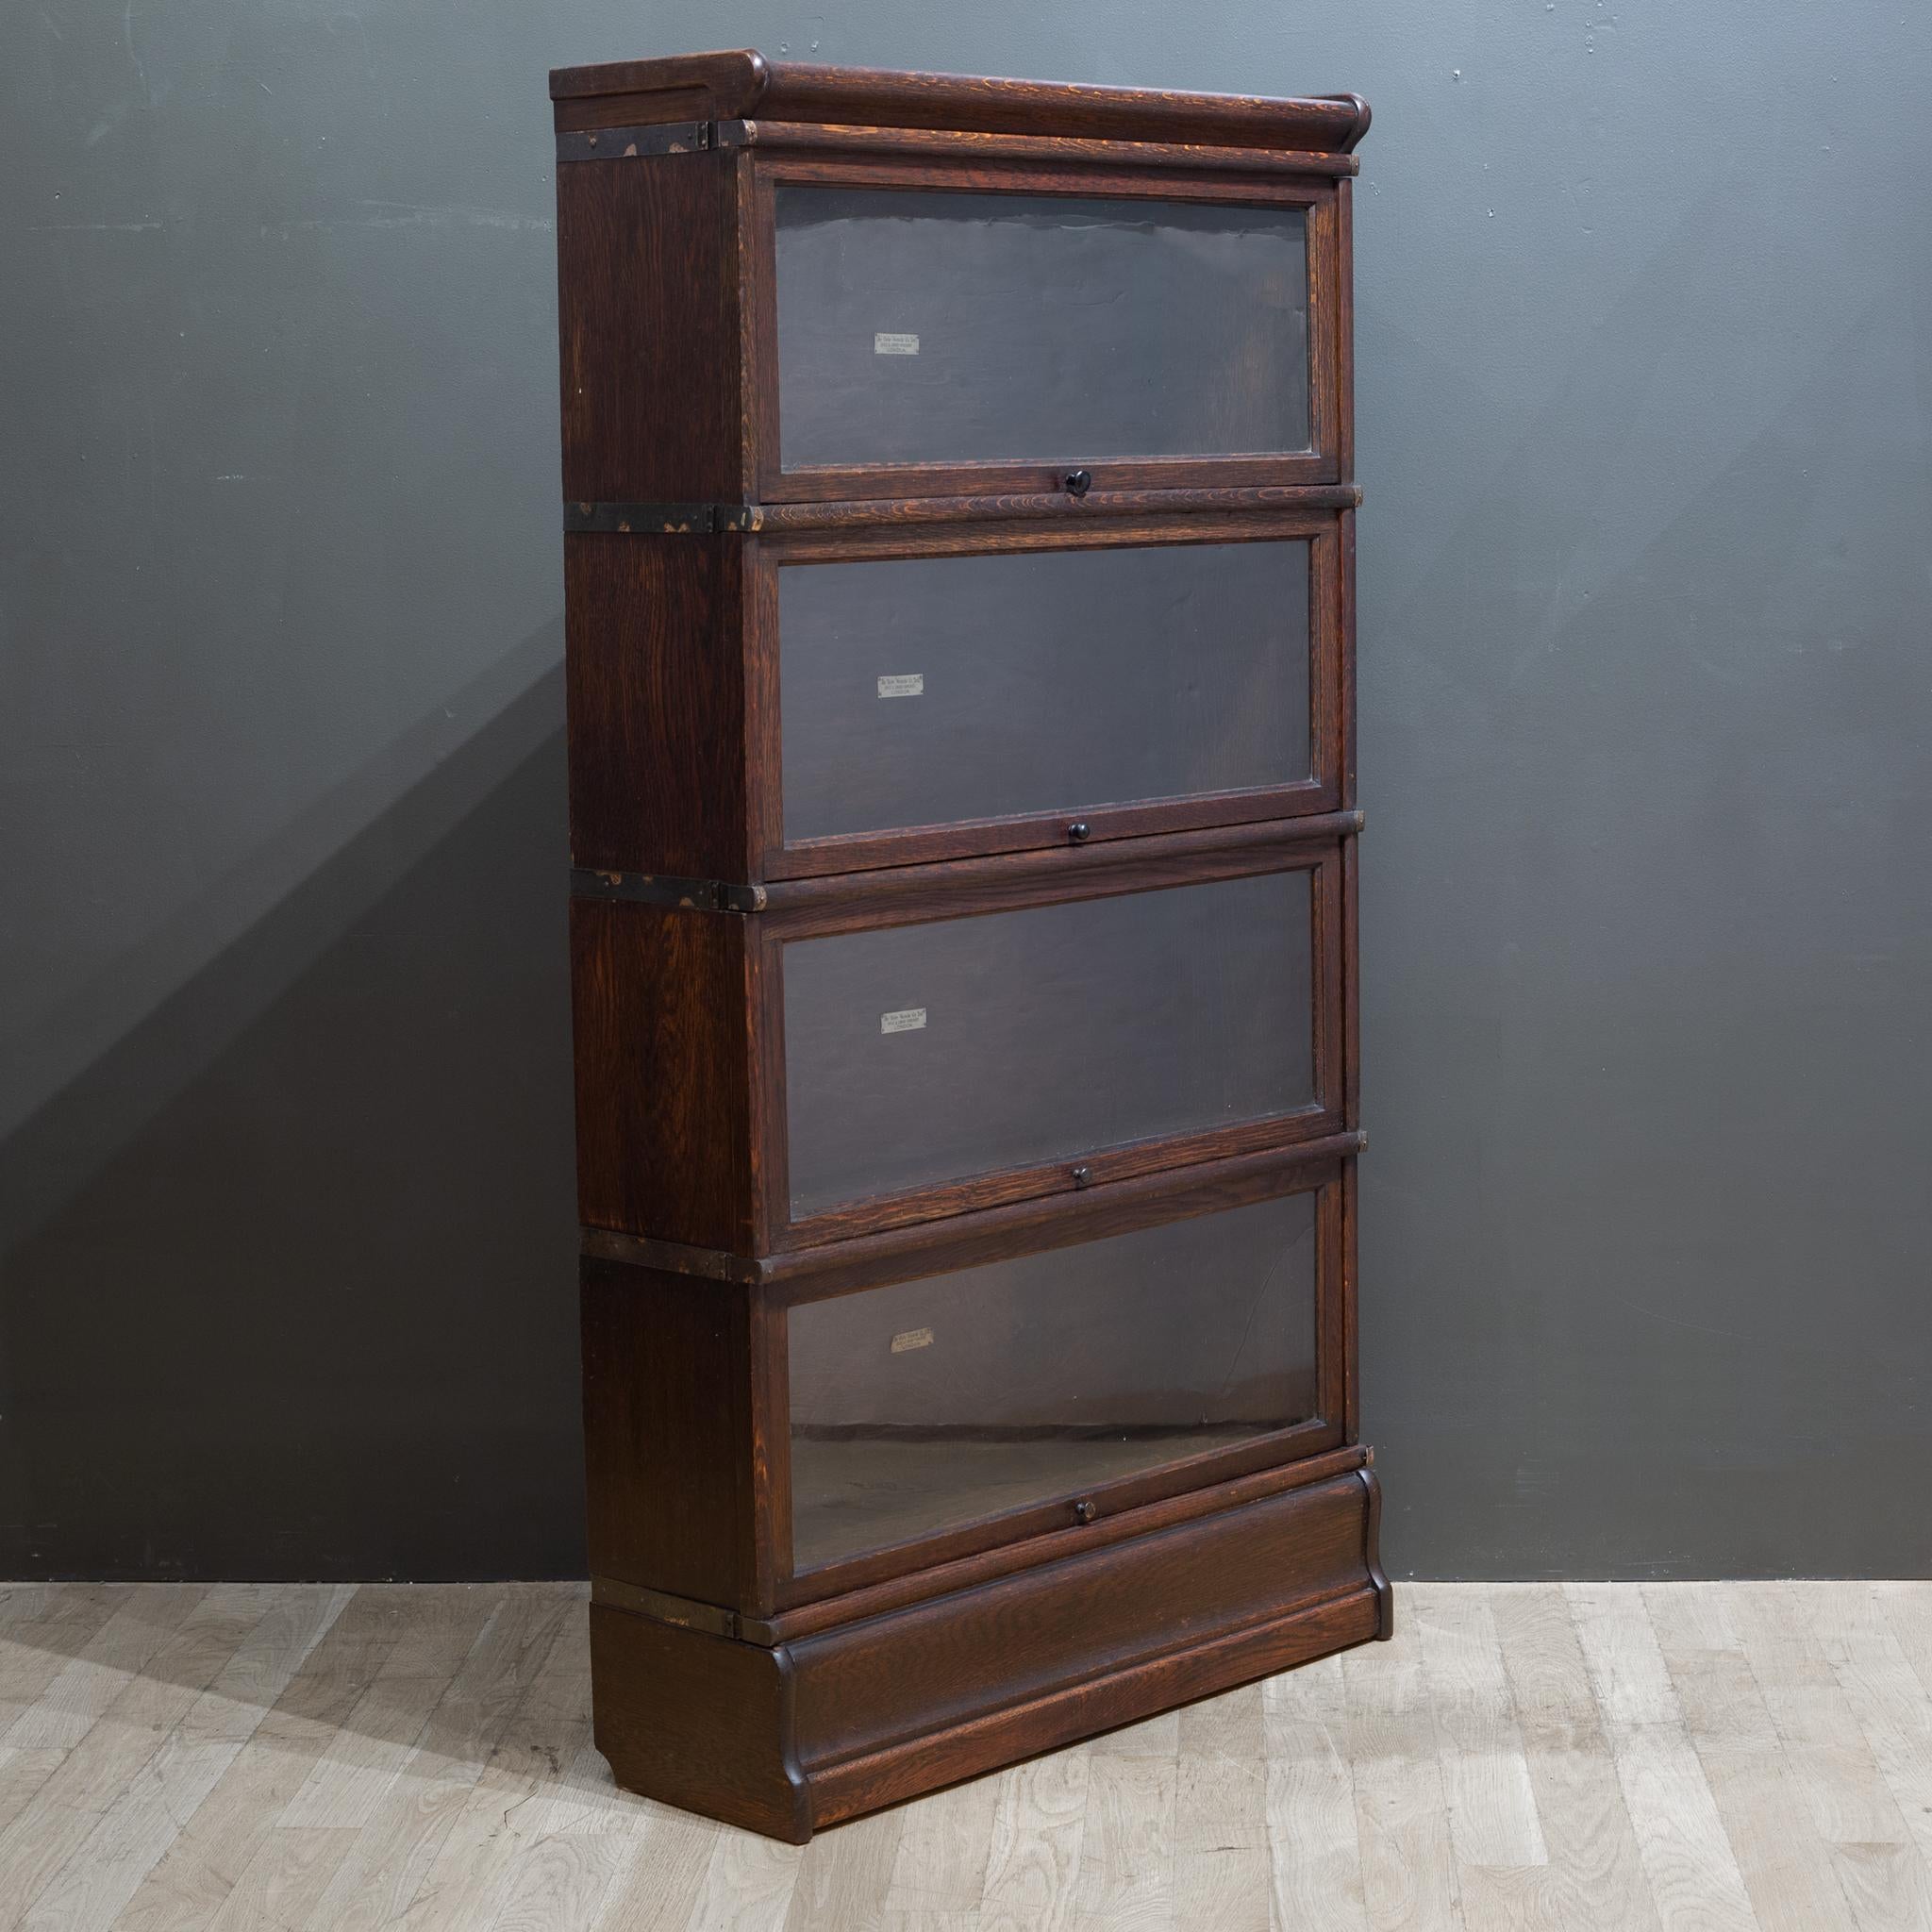 Industrial Antique Globe-Wernicke London 4 Stack Lawyer's Bookcase, c.1890-1910